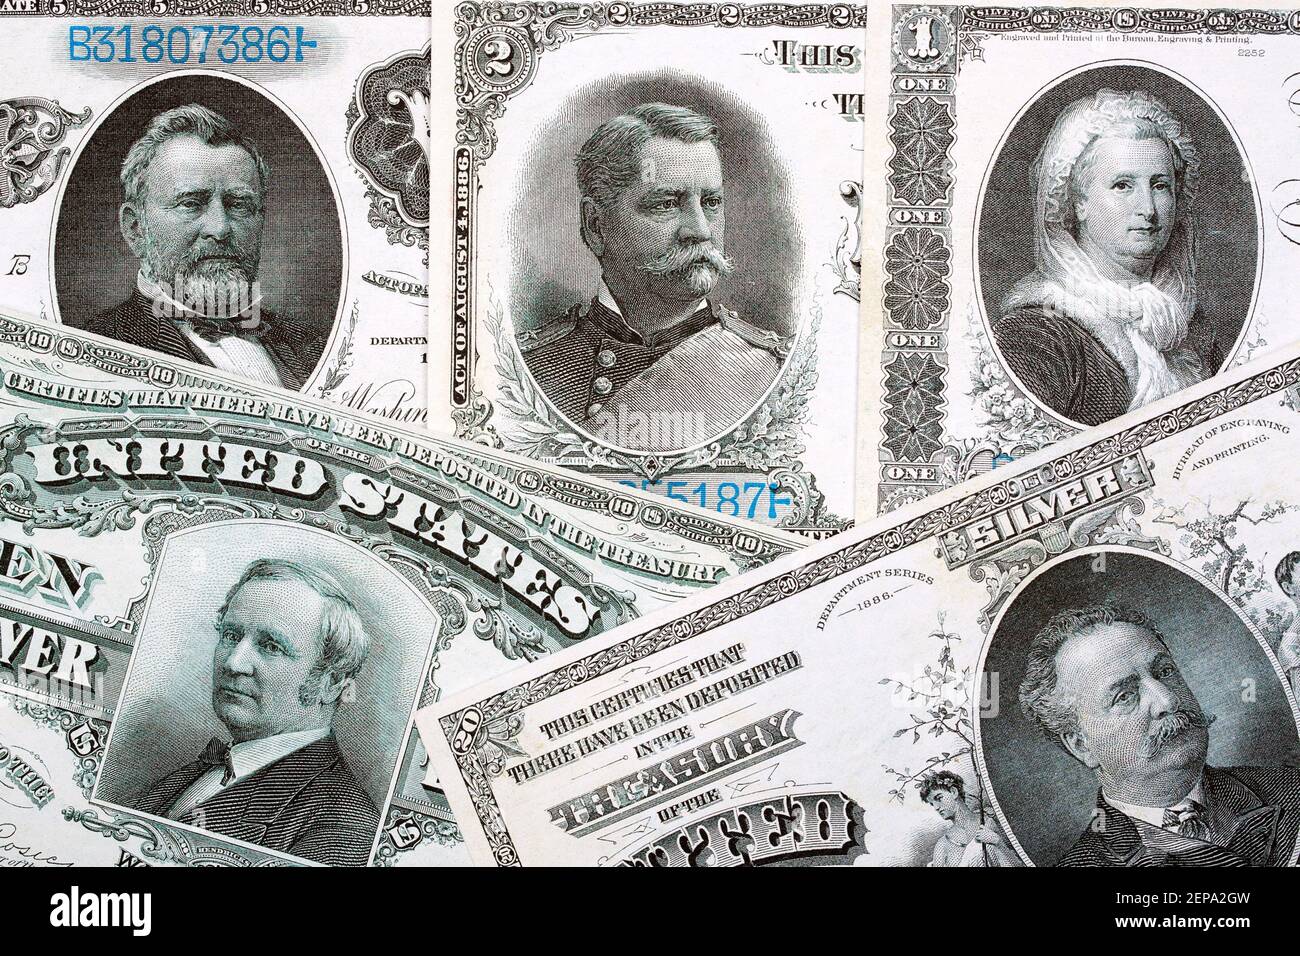 Silver Certificates - USA currency issued in 1886 Stock Photo